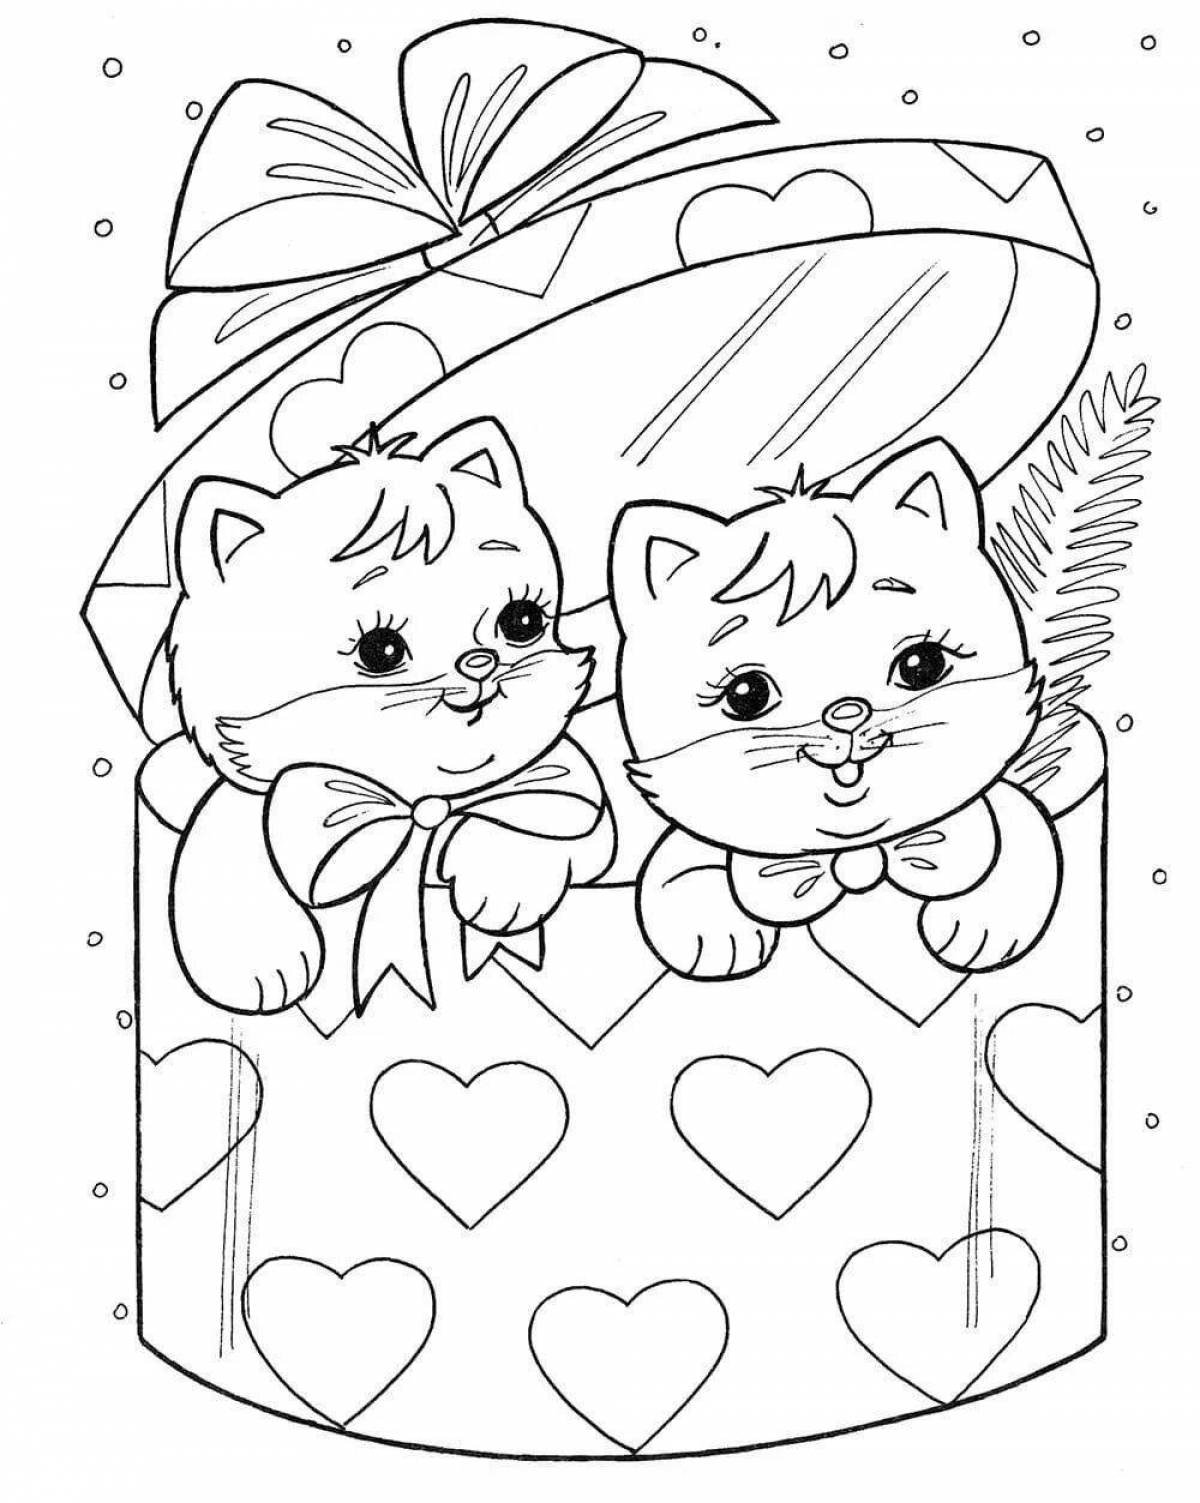 Coloring page wild year of the cat